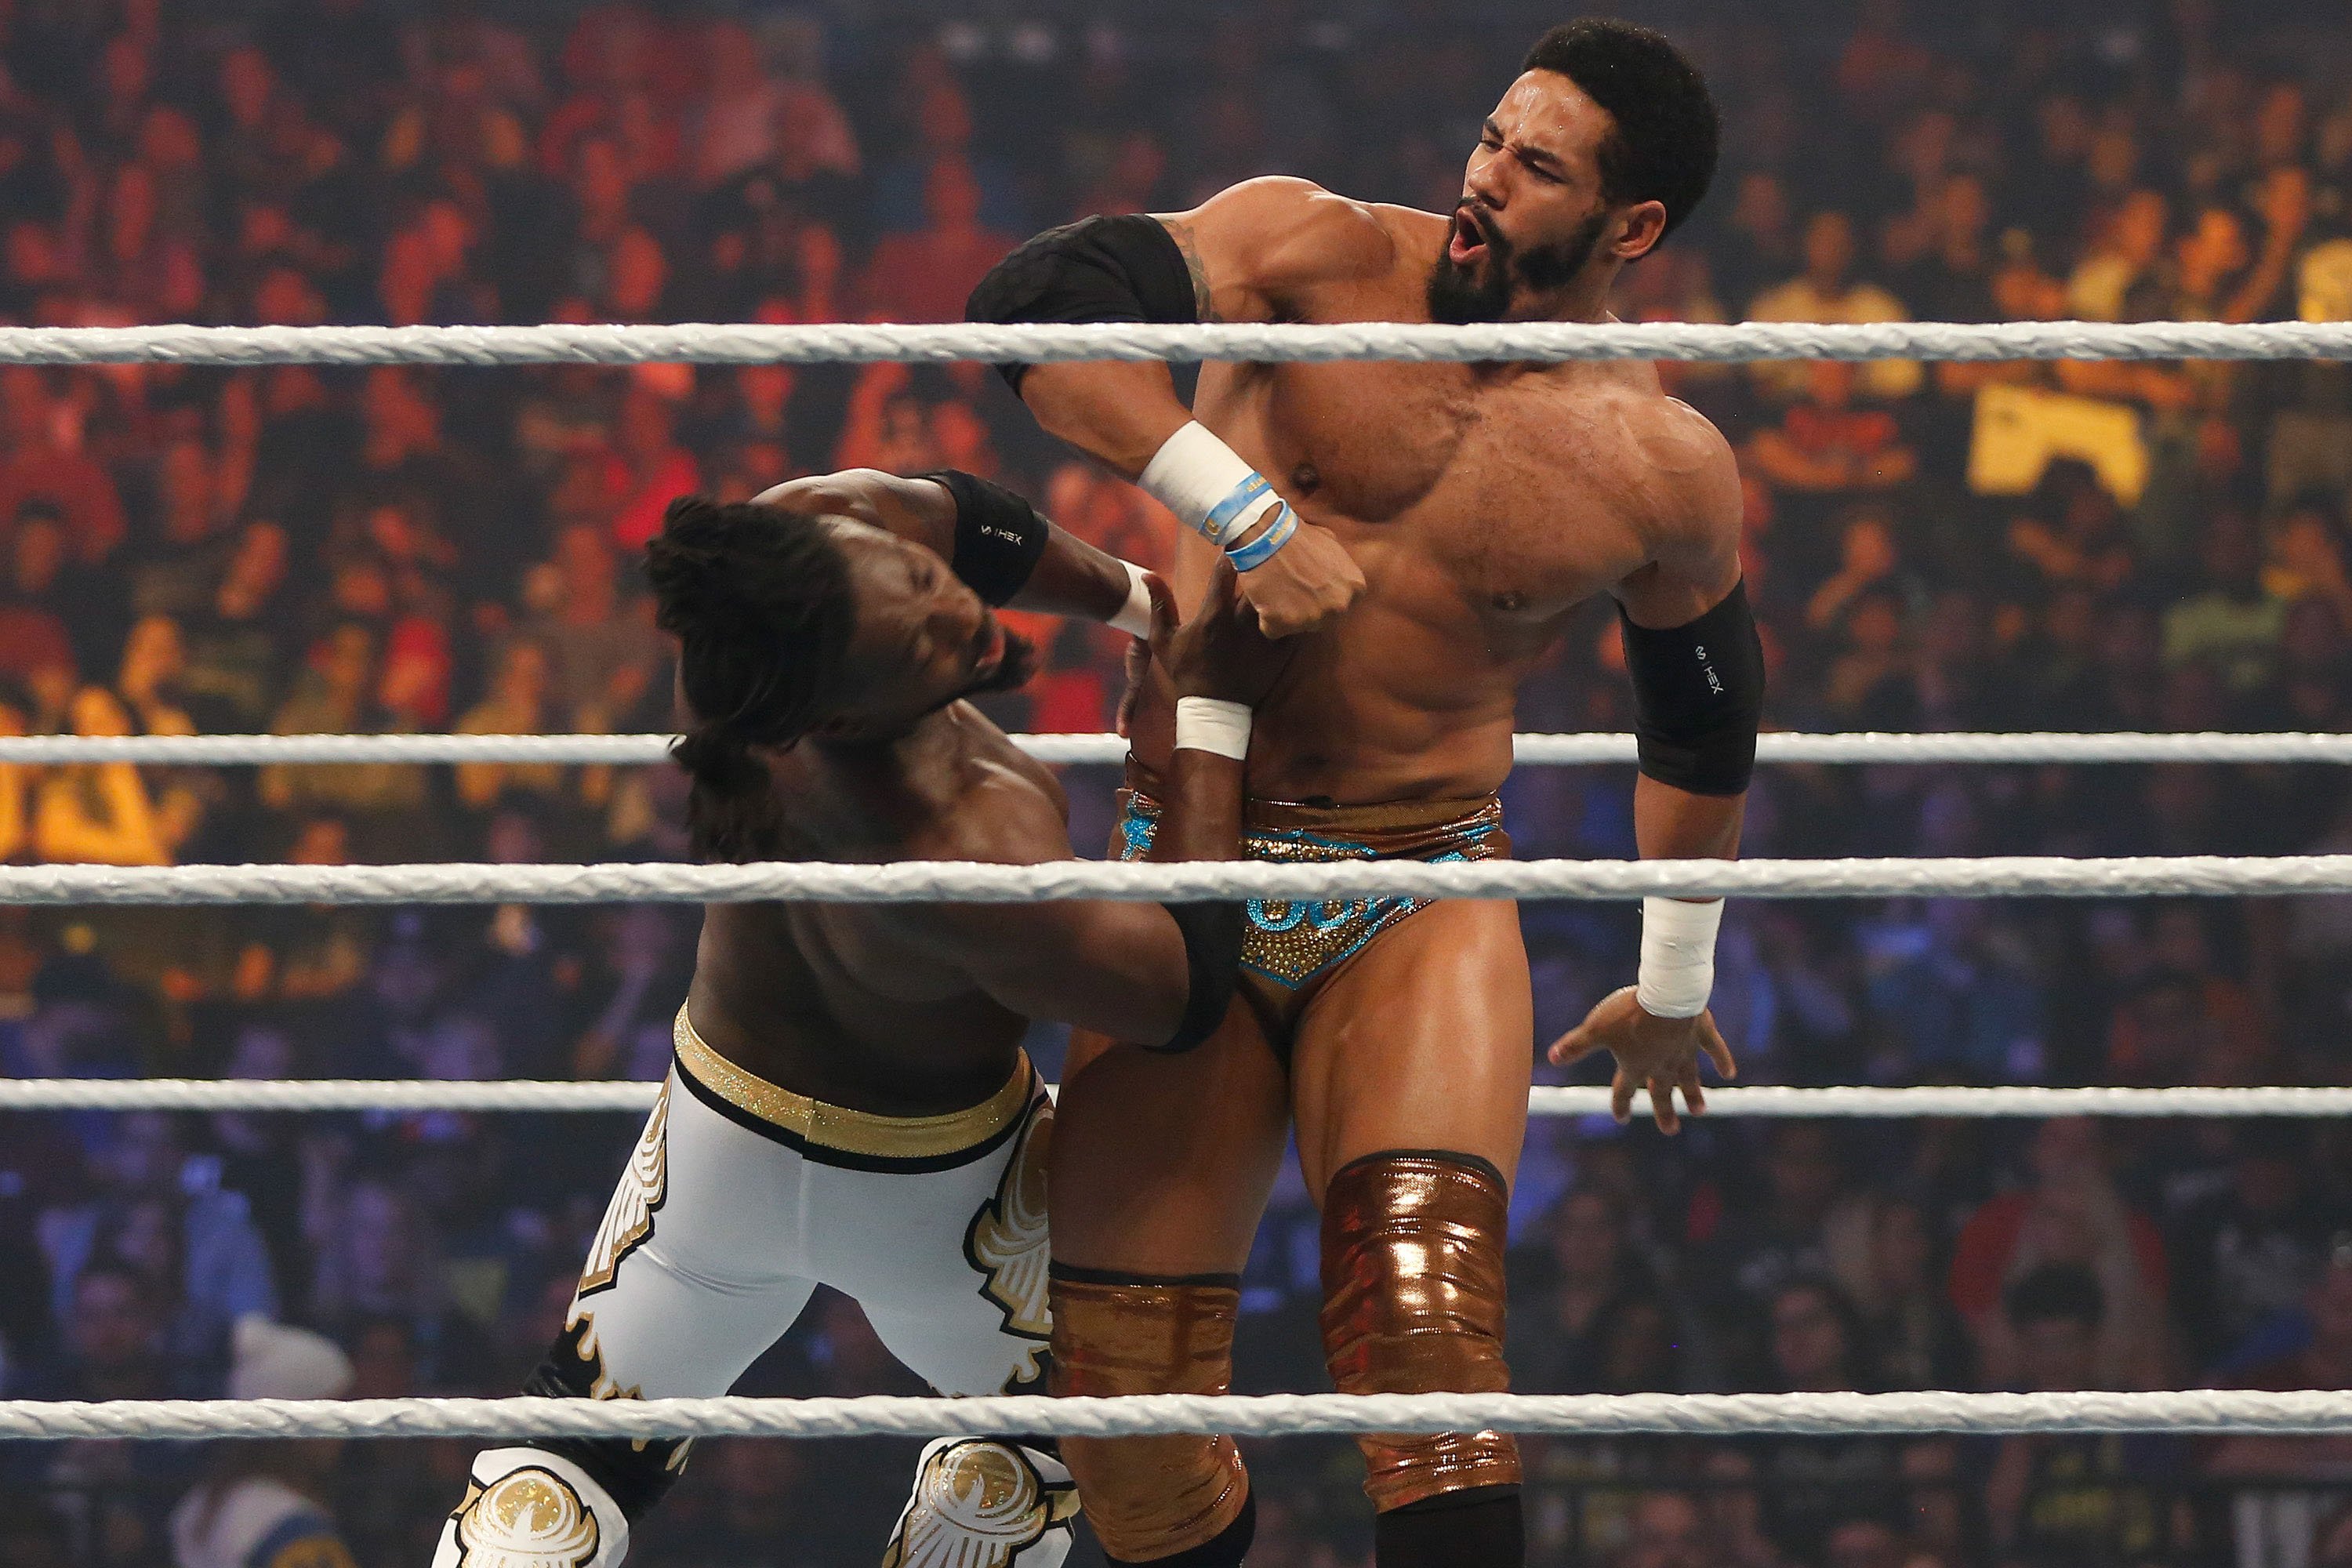 Darren Young’s 1st Post-WWE Match Announced, Enzo Battles Tony Nese On Last Night’s 205 Live (Video)